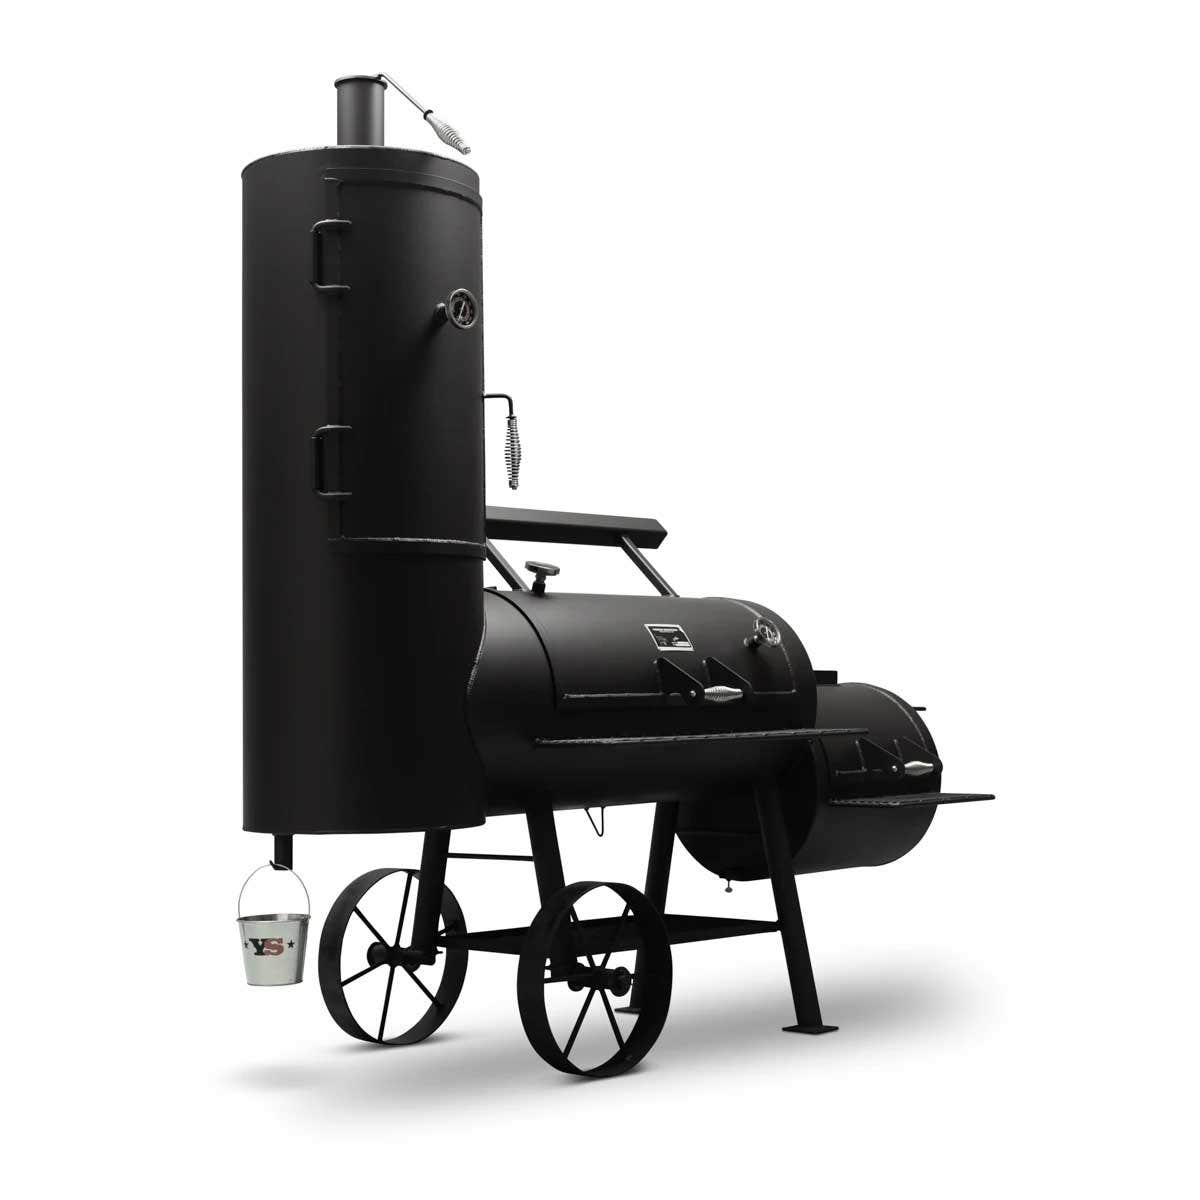 Yoder Smokers 20 inch Loaded Durango Offset Smoker Outdoor Grills 12021325